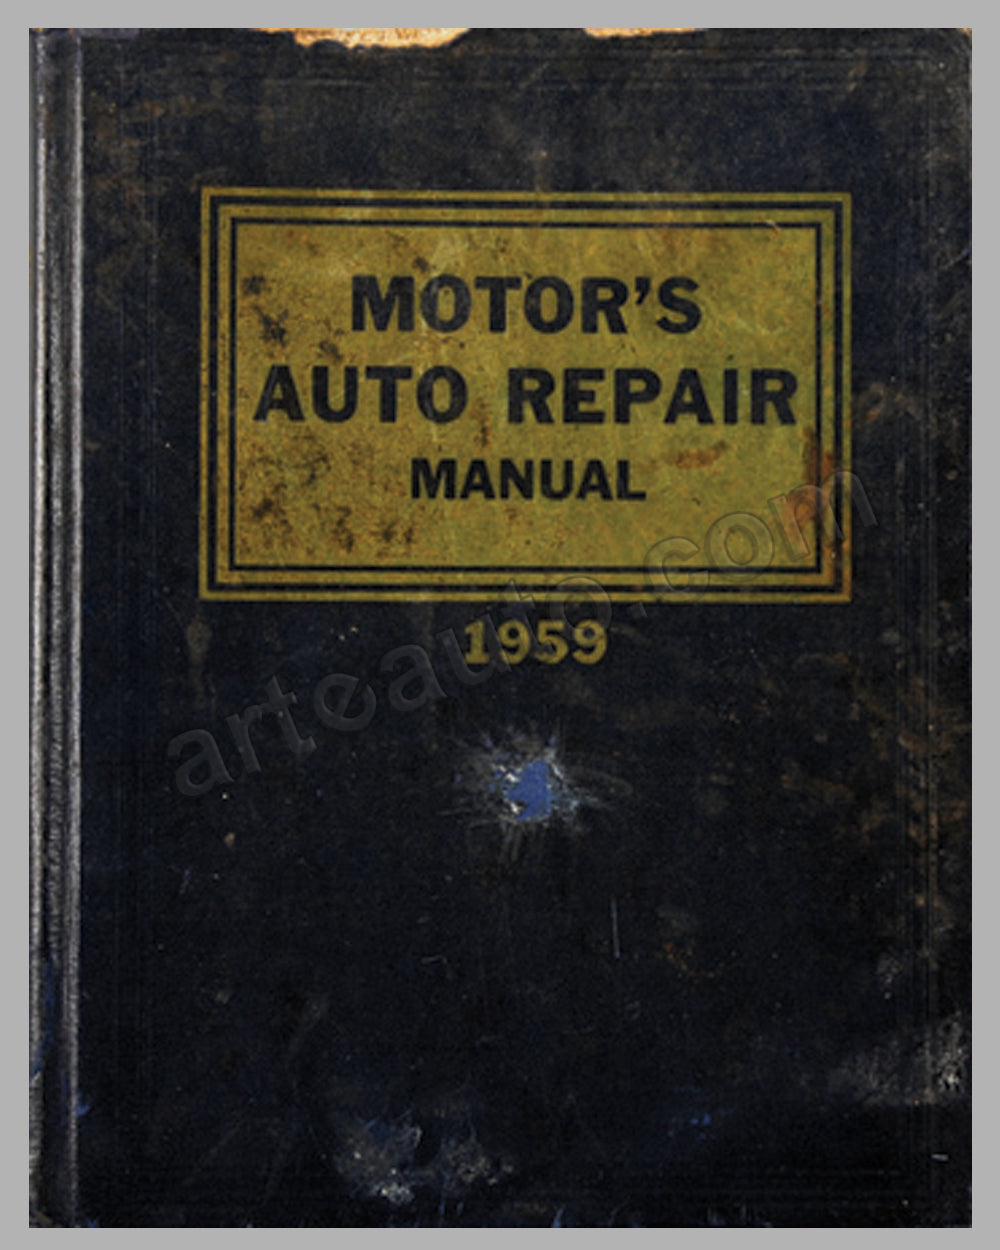 1959 Motor’s Repair Manual book published by Motor Magazine